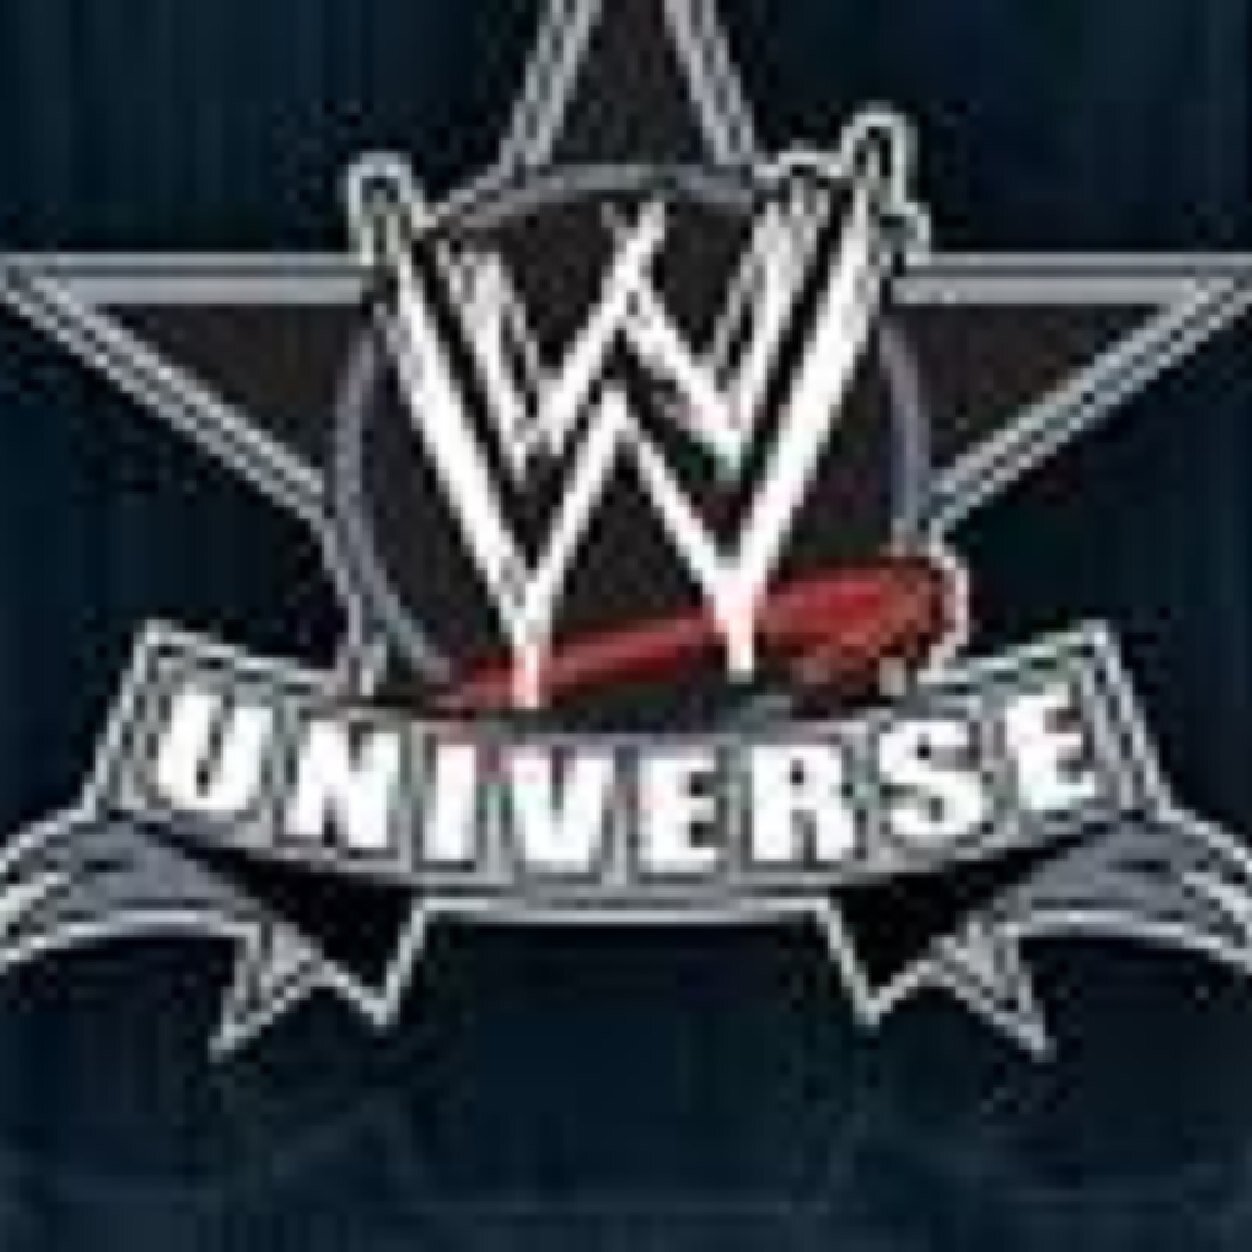 Official 2nd WWE Universe account Follow and get updates about WWE Shop, WWE Network,and WWE itself